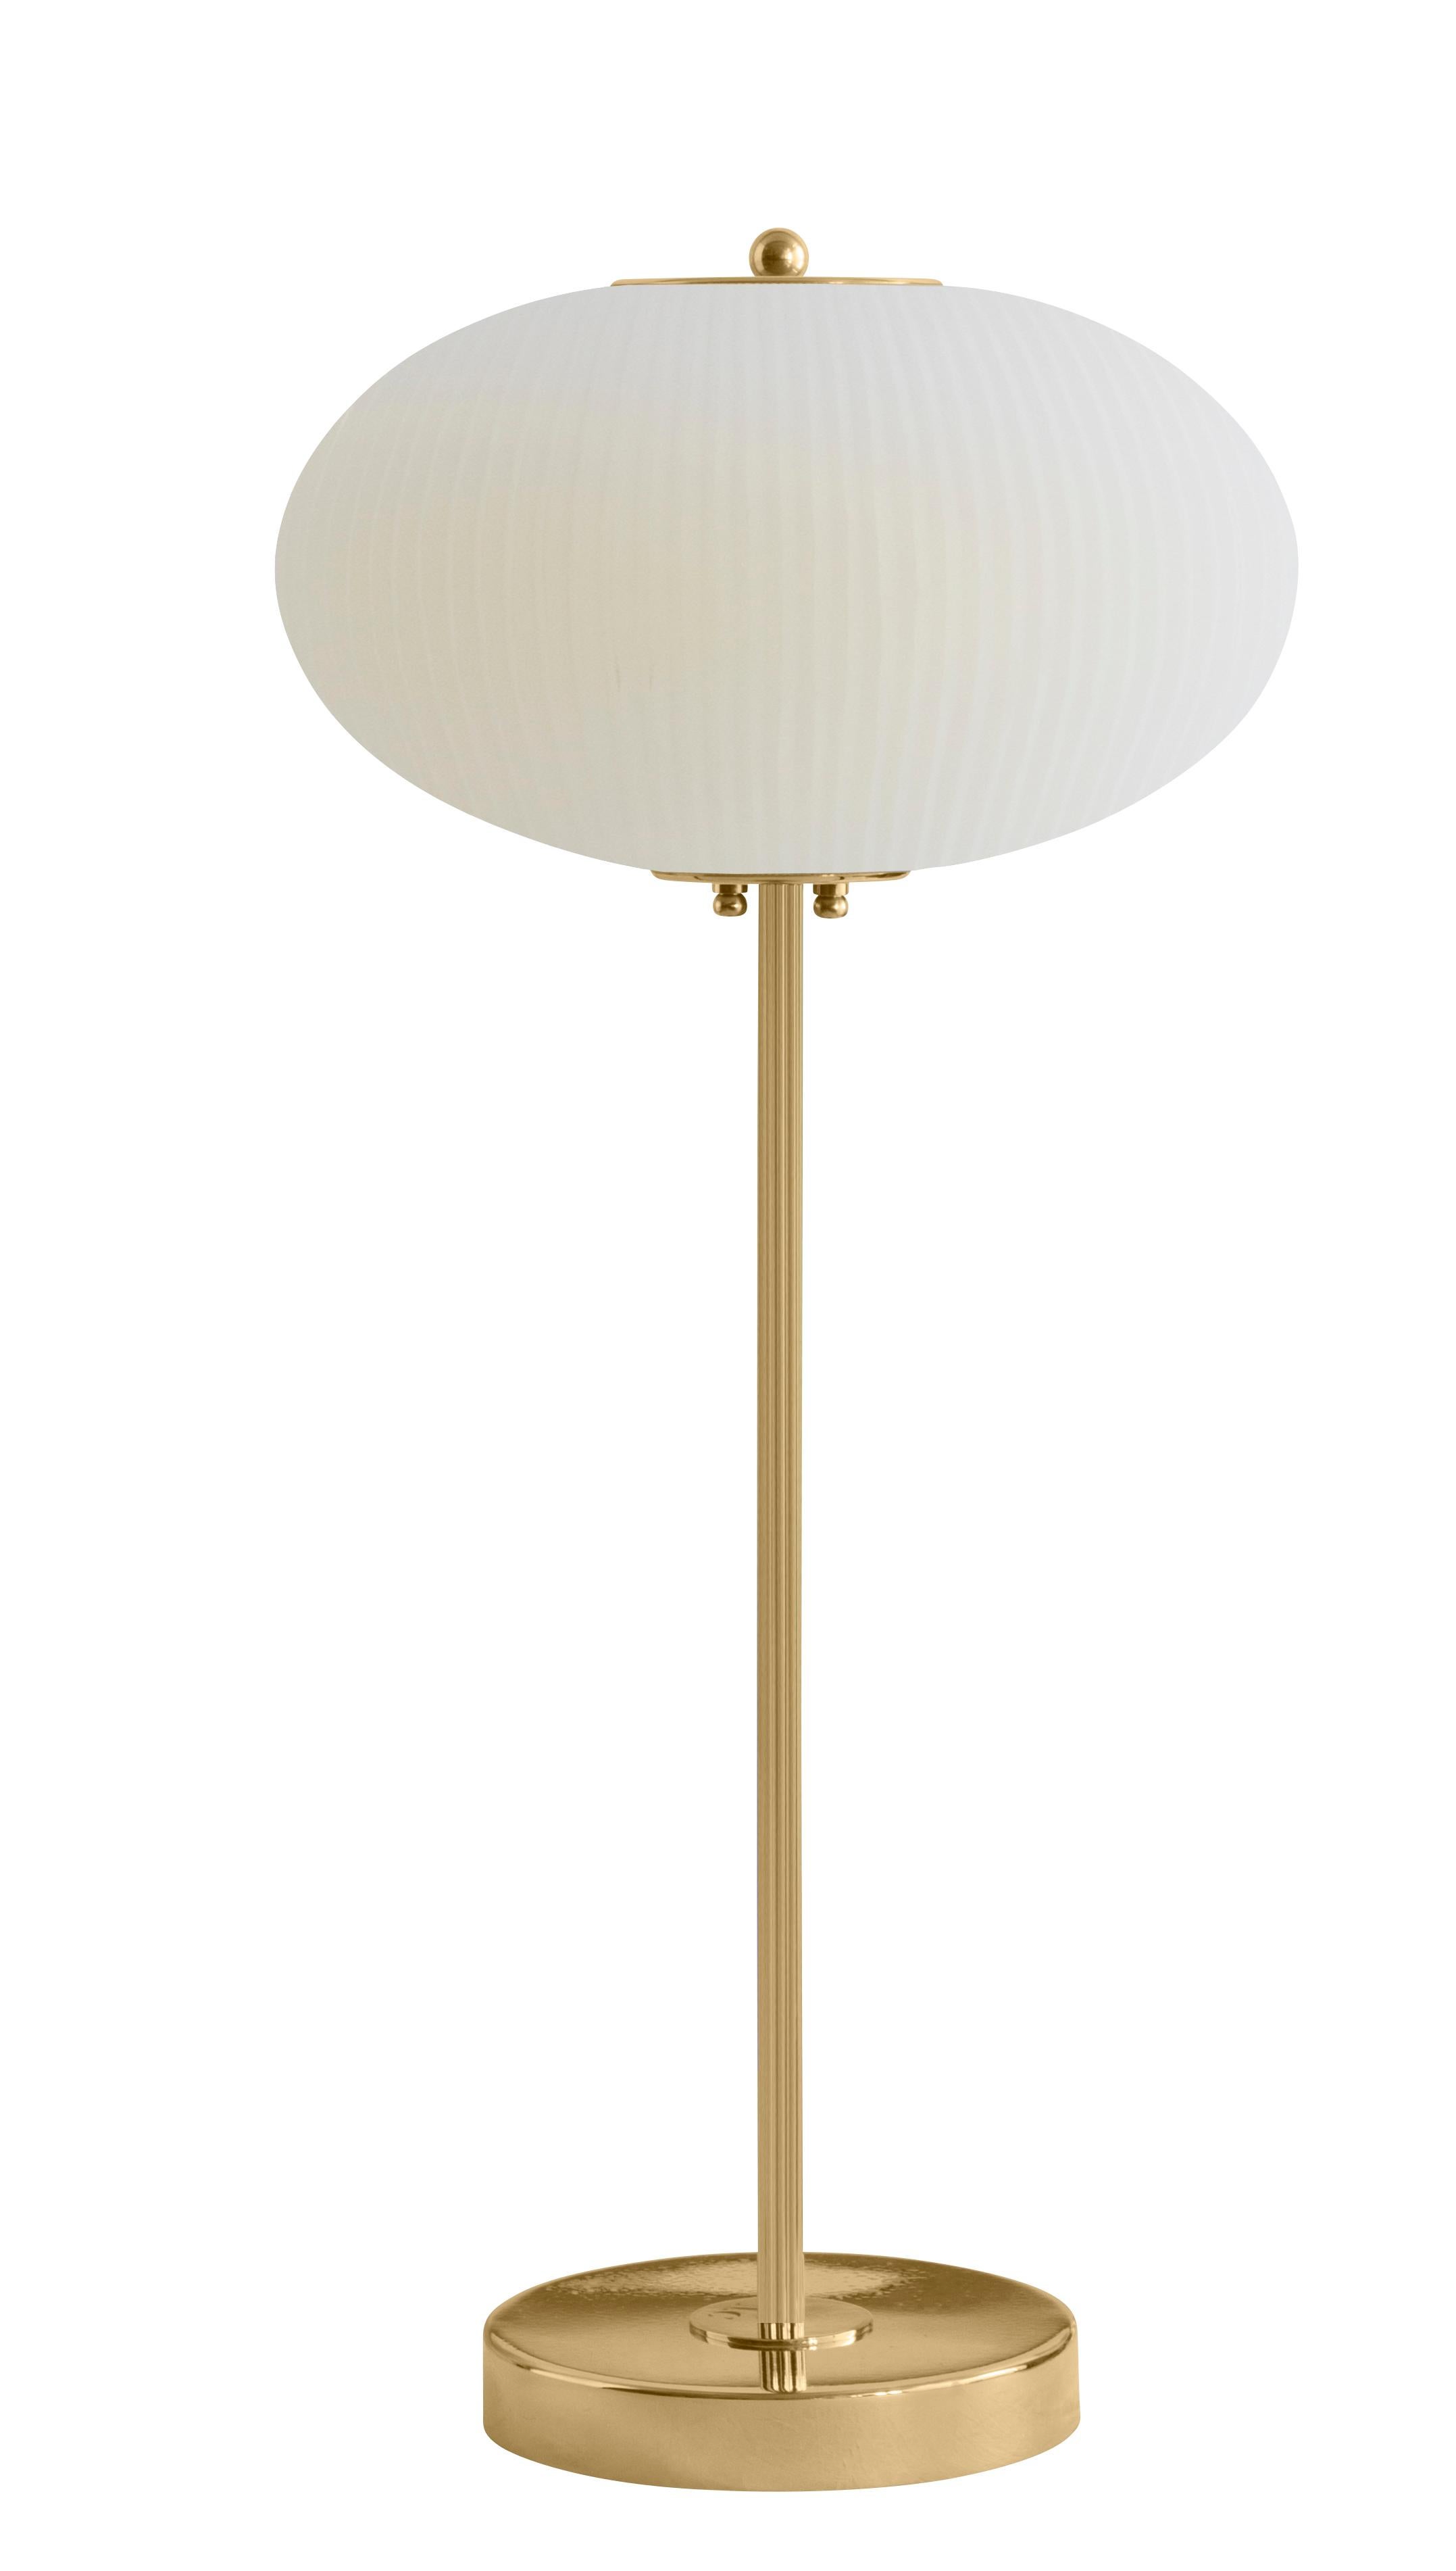 Table lamp China 07 by Magic Circus Editions
Dimensions: H 70 x W 32 x D 32 cm
Materials: Brass, mouth blown glass sculpted with a diamond saw
Colour: ivory

Available finishes: Brass, nickel
Available colours: enamel soft white, soft rose,